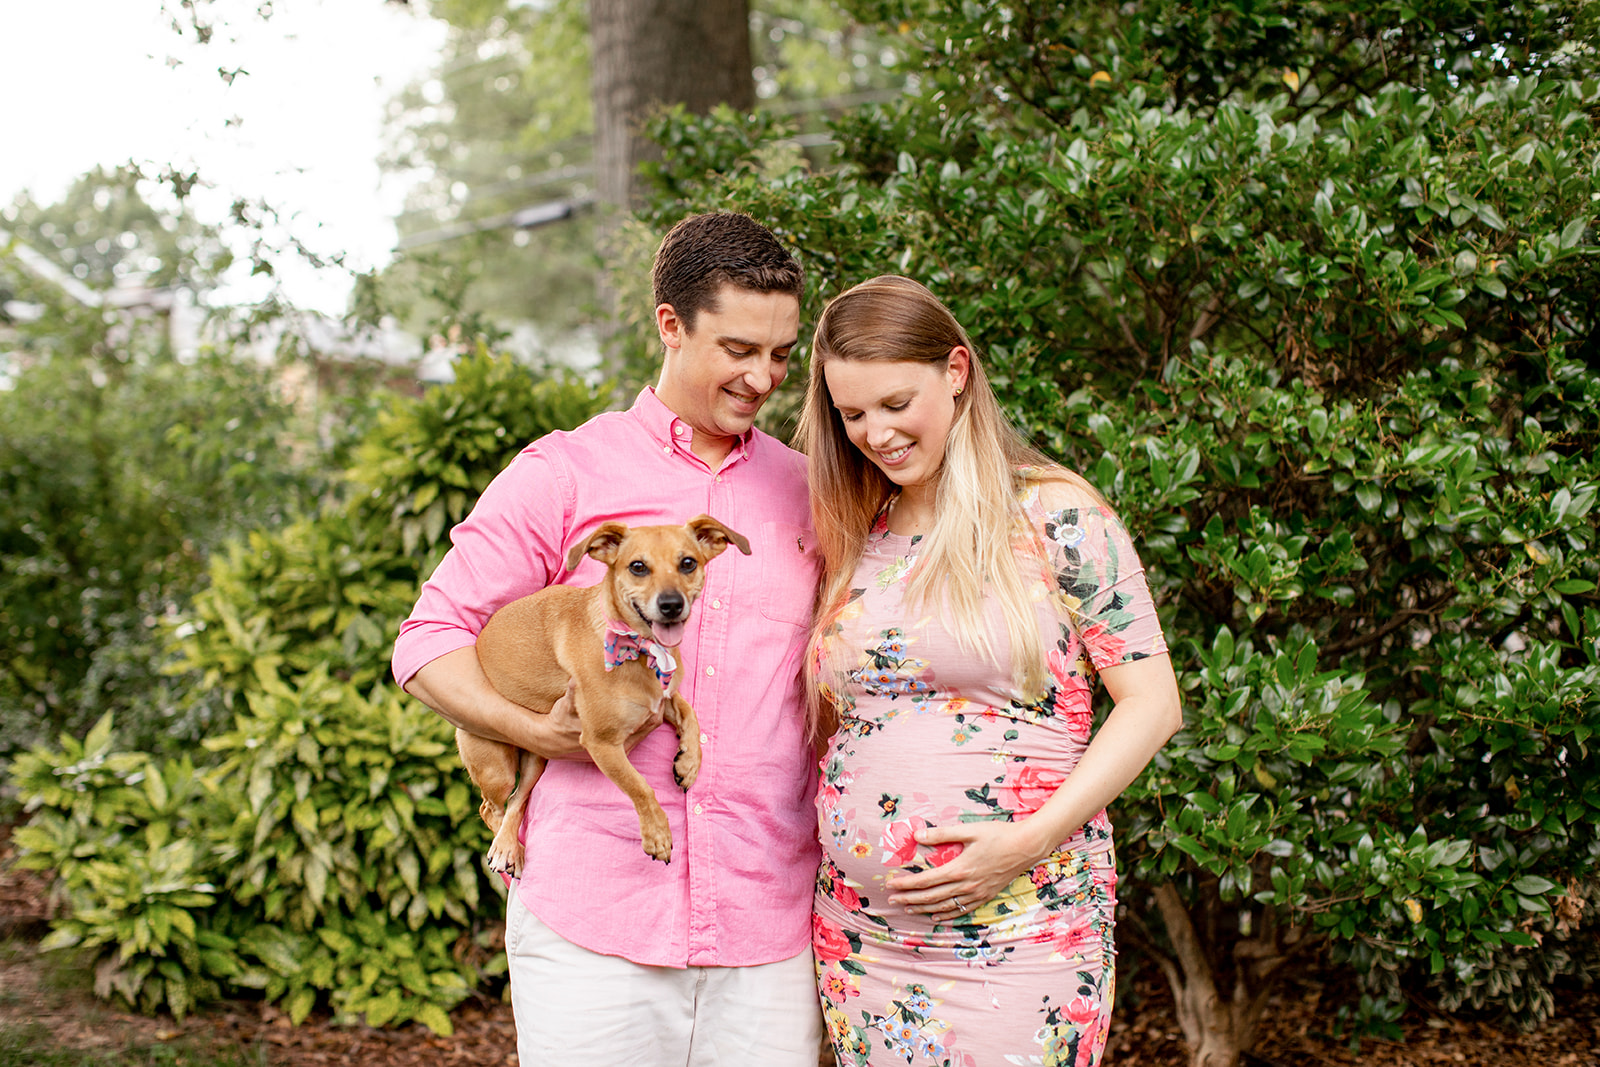 At Home Maternity Photos With a Dog Richmond Va - Image Property of www.j-dphoto.com